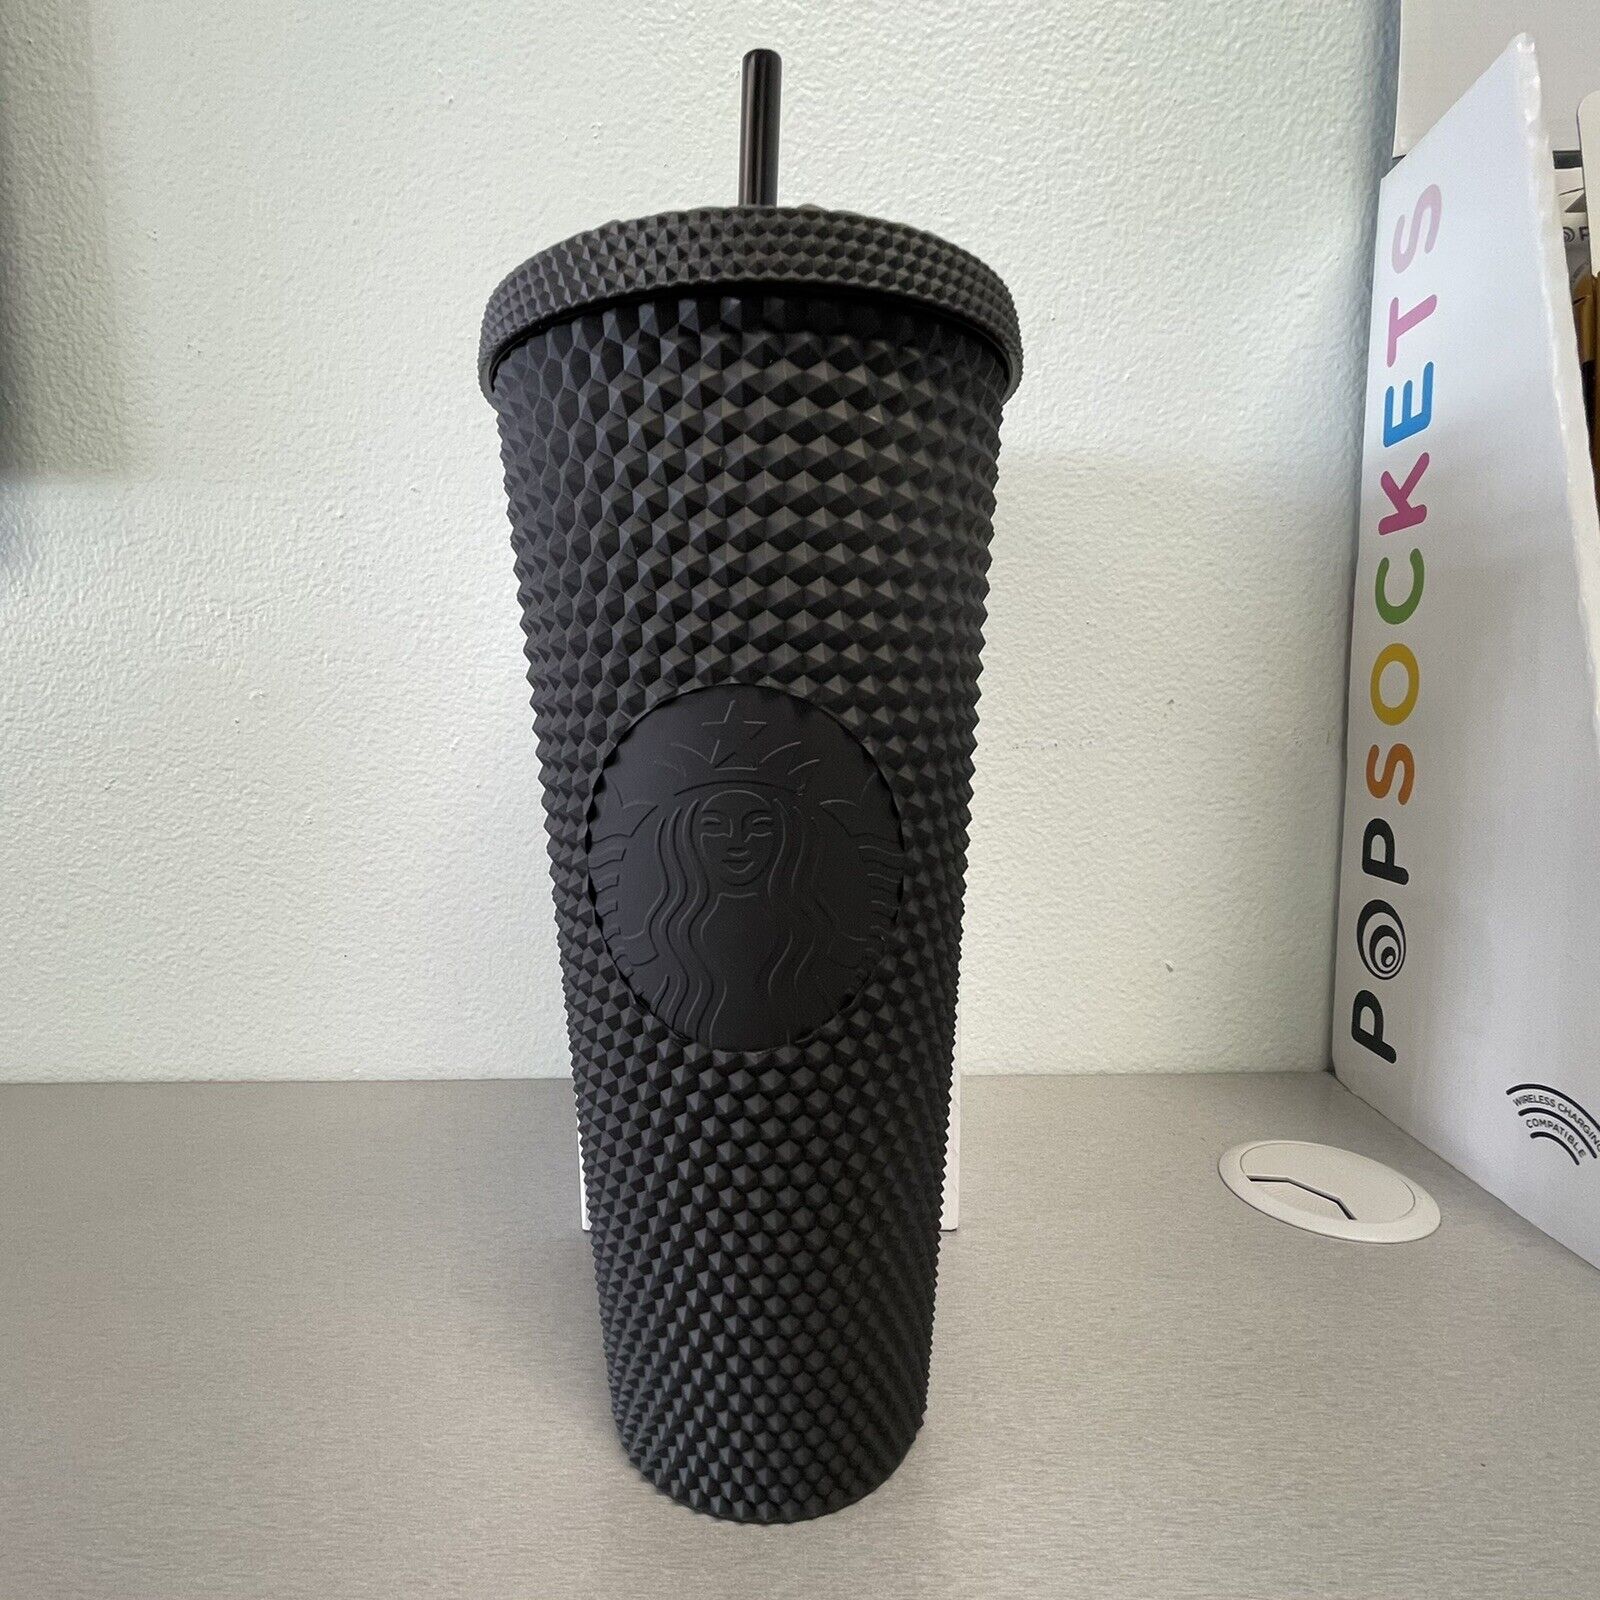 NEW Starbucks Matte Black Studded Tumbler Cup - Limited Edition With Logo